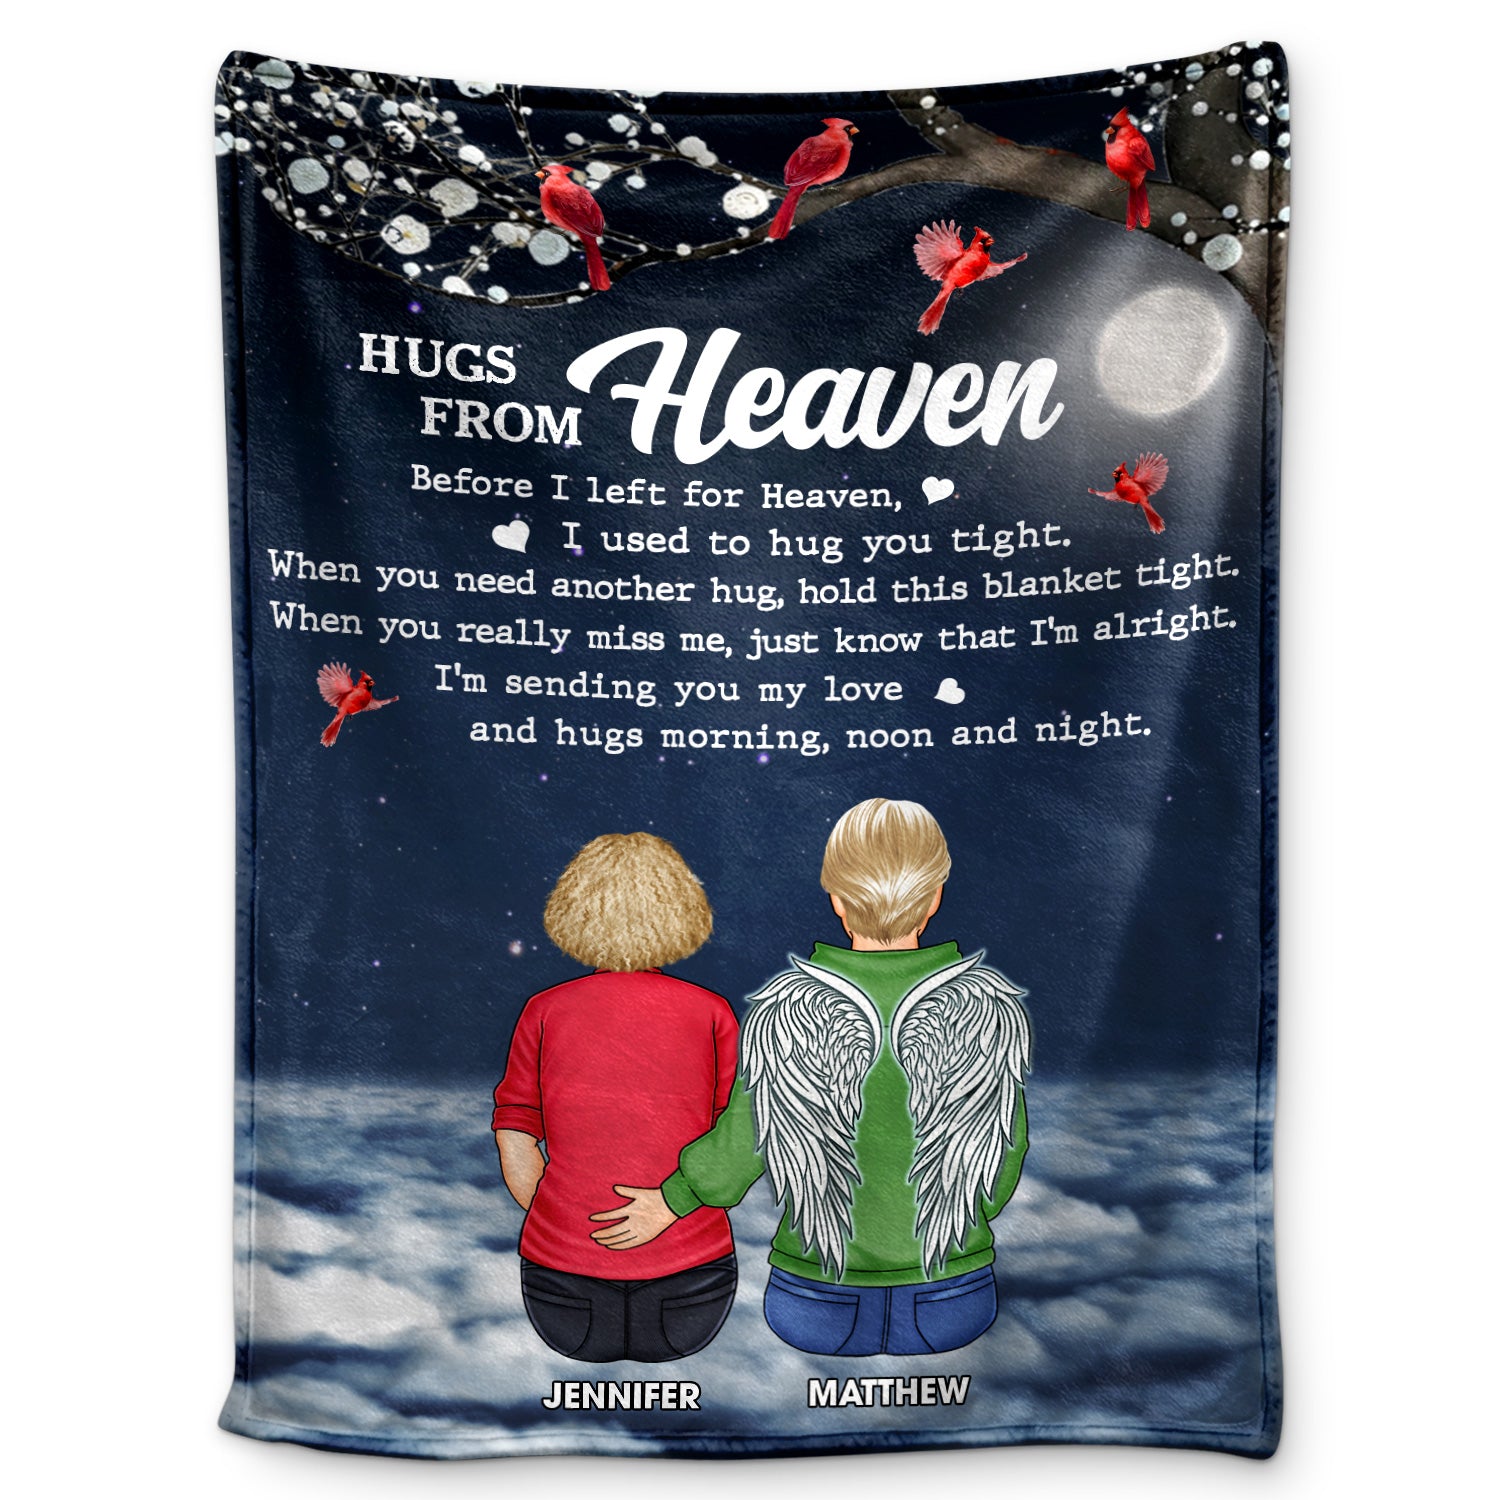 Hugs From Heaven Memorial - Sympathy Gift To Comfort Those Grieving The Loss Of A Loved One - Personalized Fleece Blanket